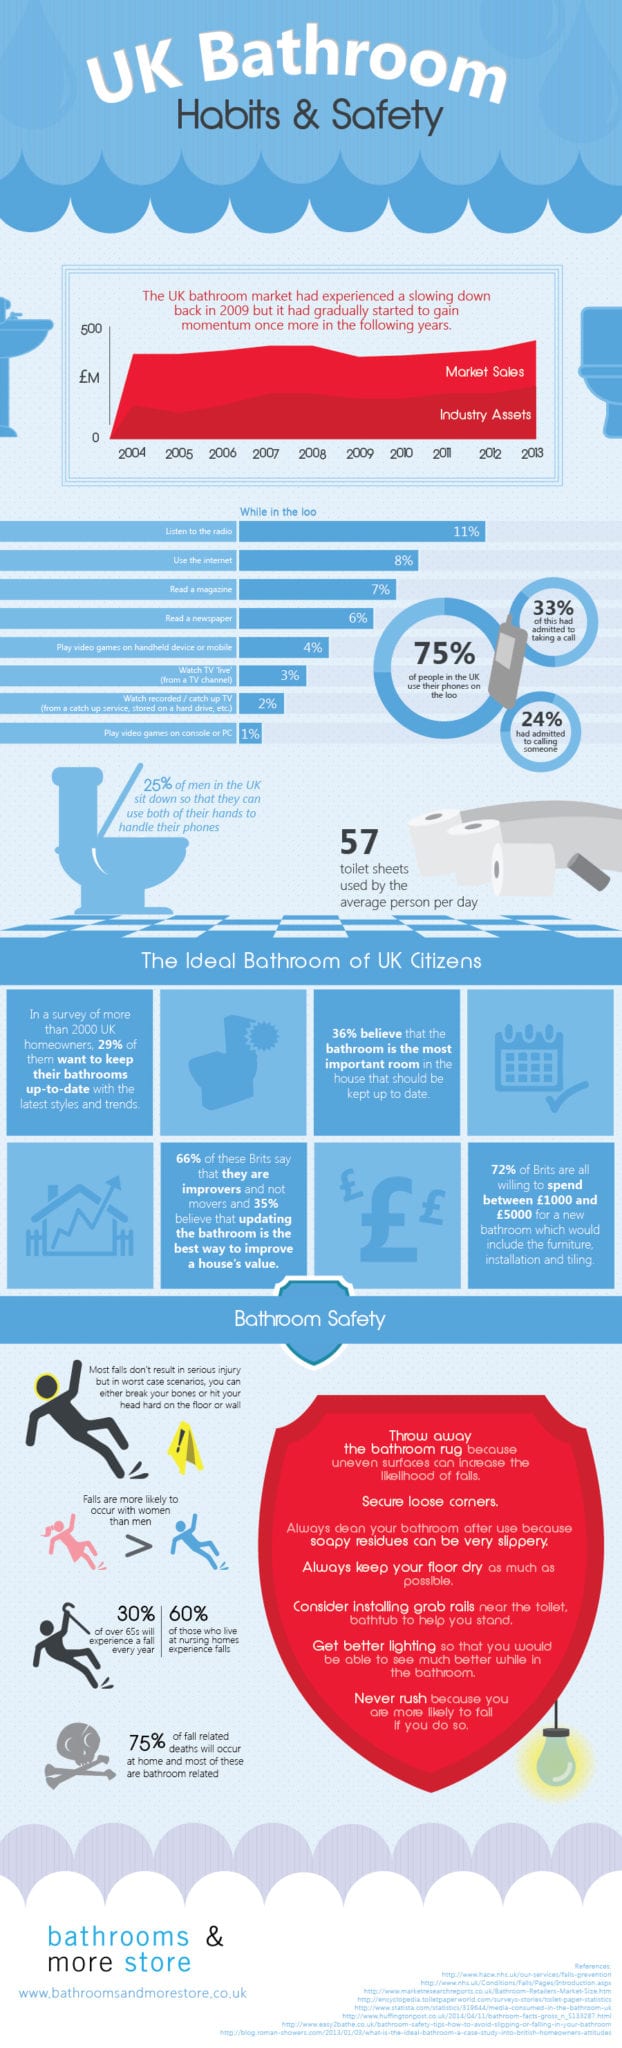 Infographic on Bathroom Habits and Safety in the UK